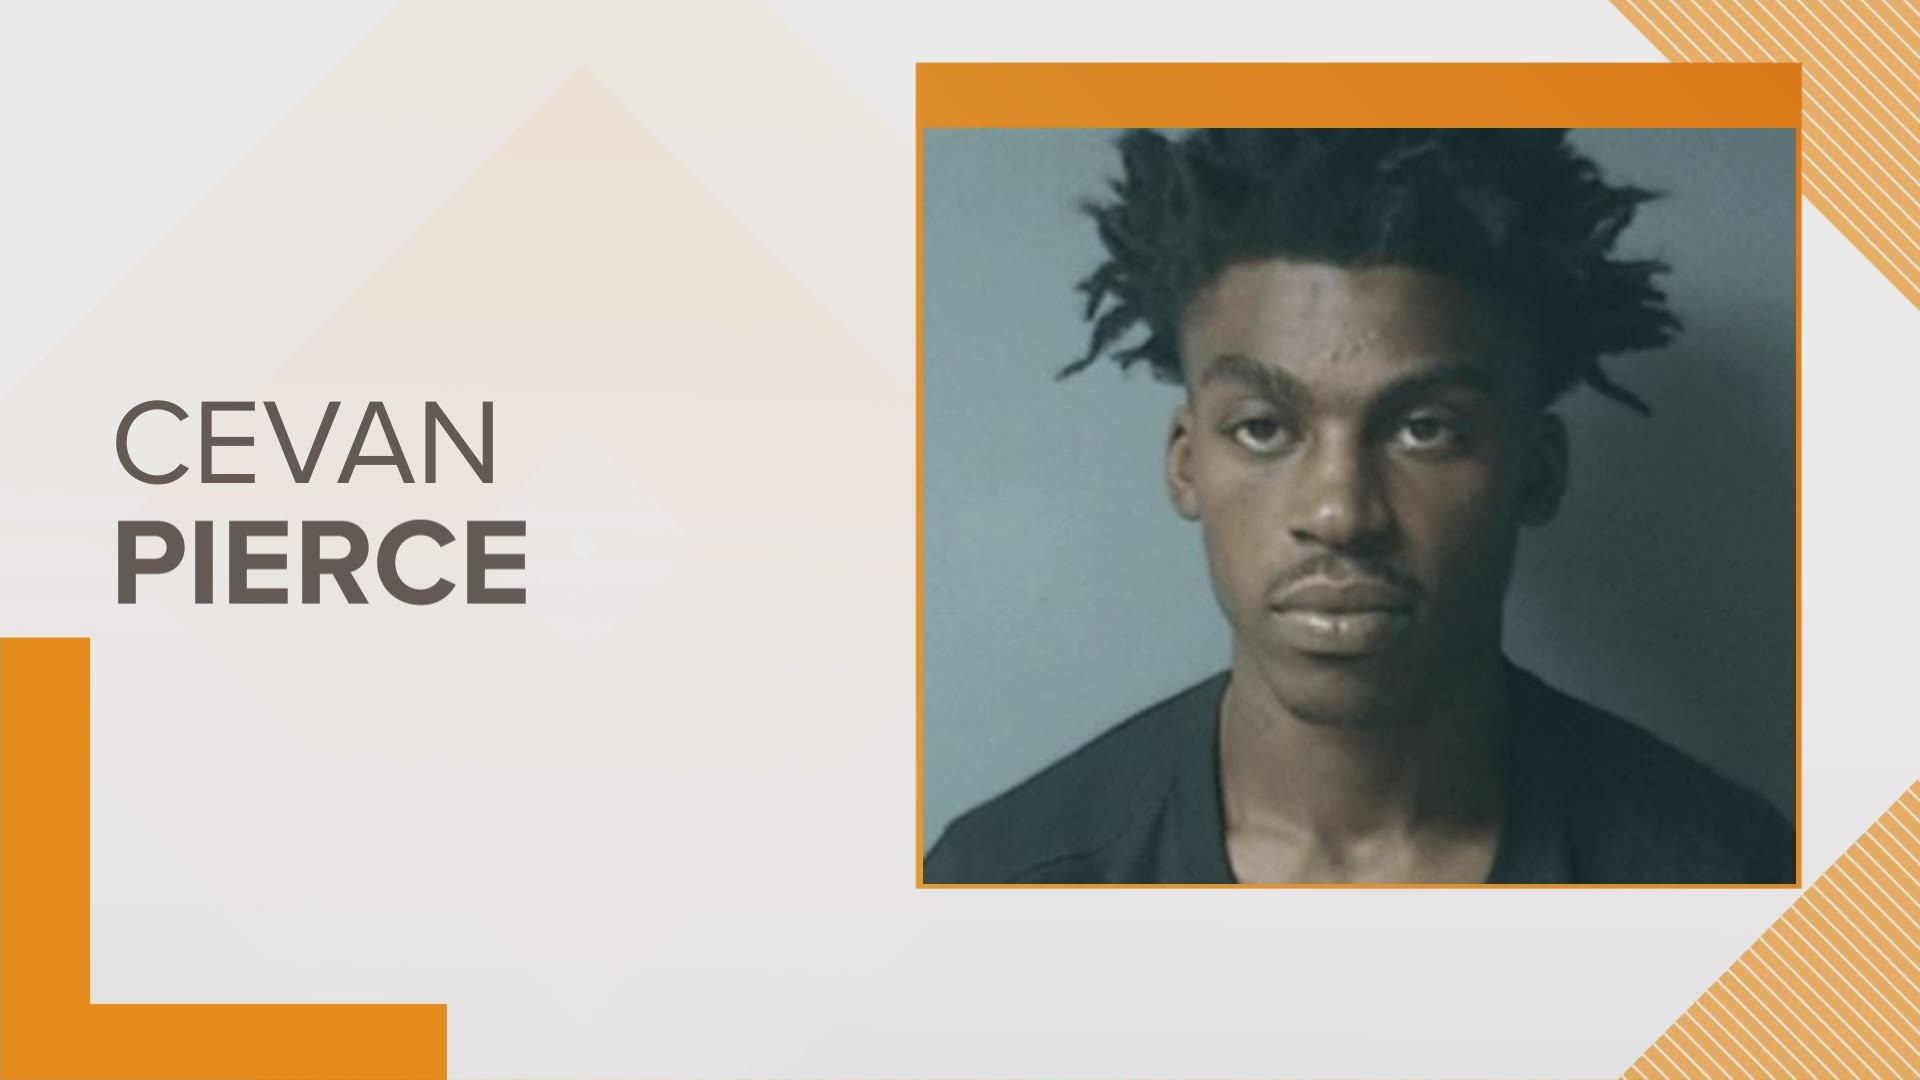 Cevan Pierce was charged with malicious wounding and other crimes related to the shooting. The boy is expected to recover.